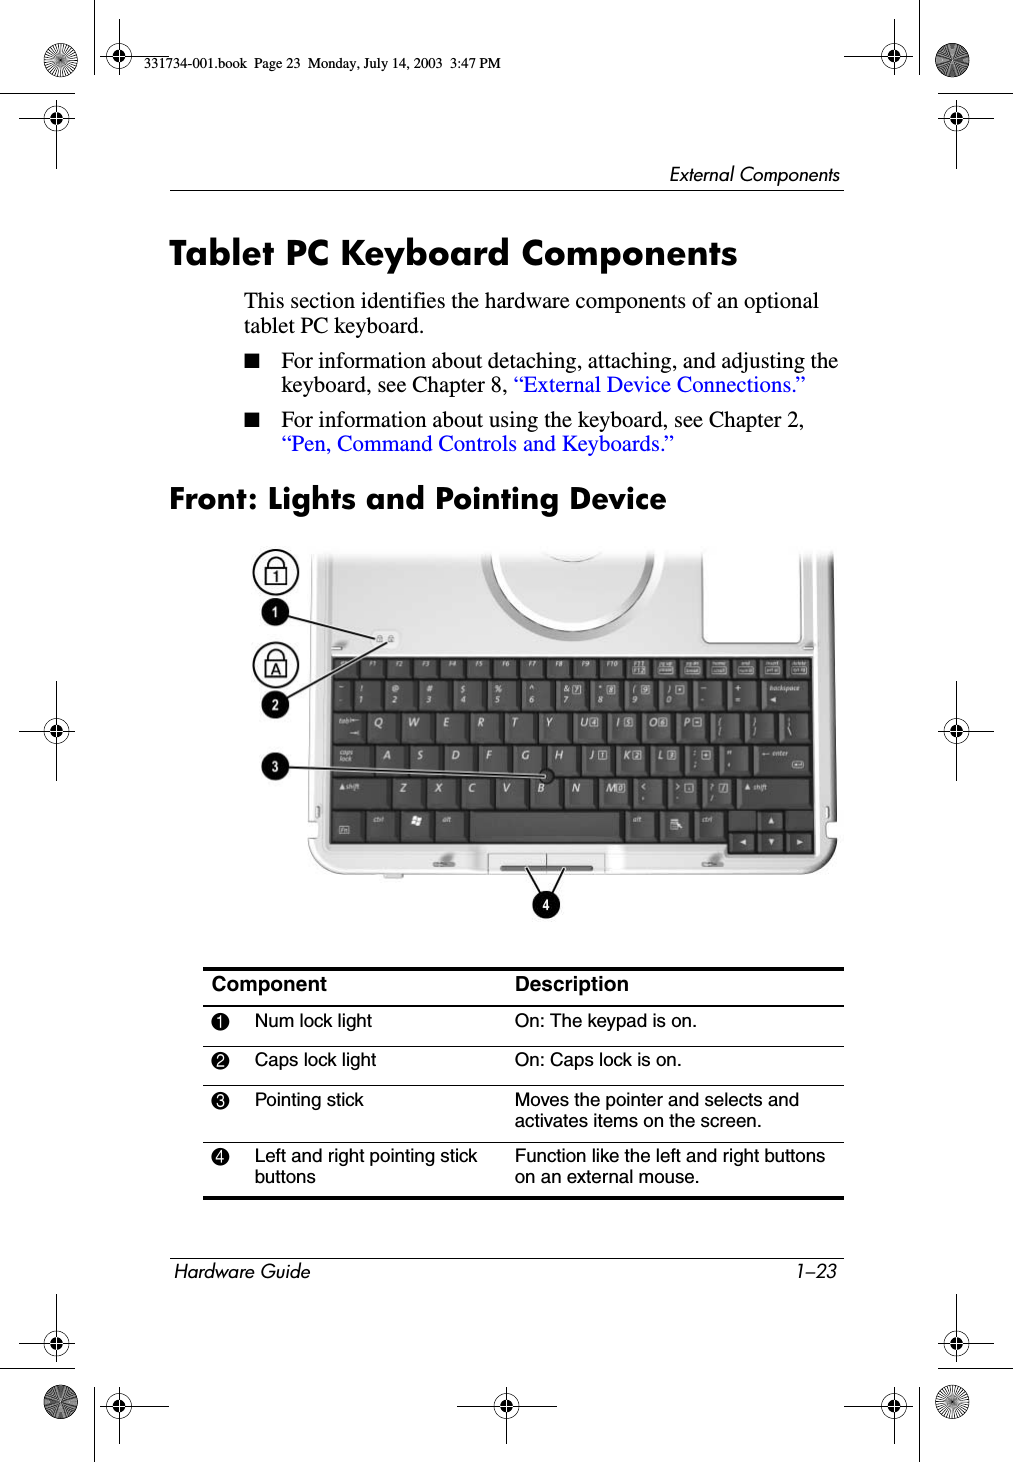 External ComponentsHardware Guide 1–23Tablet PC Keyboard ComponentsThis section identifies the hardware components of an optional tablet PC keyboard.■For information about detaching, attaching, and adjusting the keyboard, see Chapter 8, “External Device Connections.”■For information about using the keyboard, see Chapter 2, “Pen, Command Controls and Keyboards.”Front: Lights and Pointing DeviceComponent Description1Num lock light On: The keypad is on.2Caps lock light On: Caps lock is on.3Pointing stick Moves the pointer and selects and activates items on the screen.4Left and right pointing stick buttonsFunction like the left and right buttons on an external mouse.331734-001.book  Page 23  Monday, July 14, 2003  3:47 PM